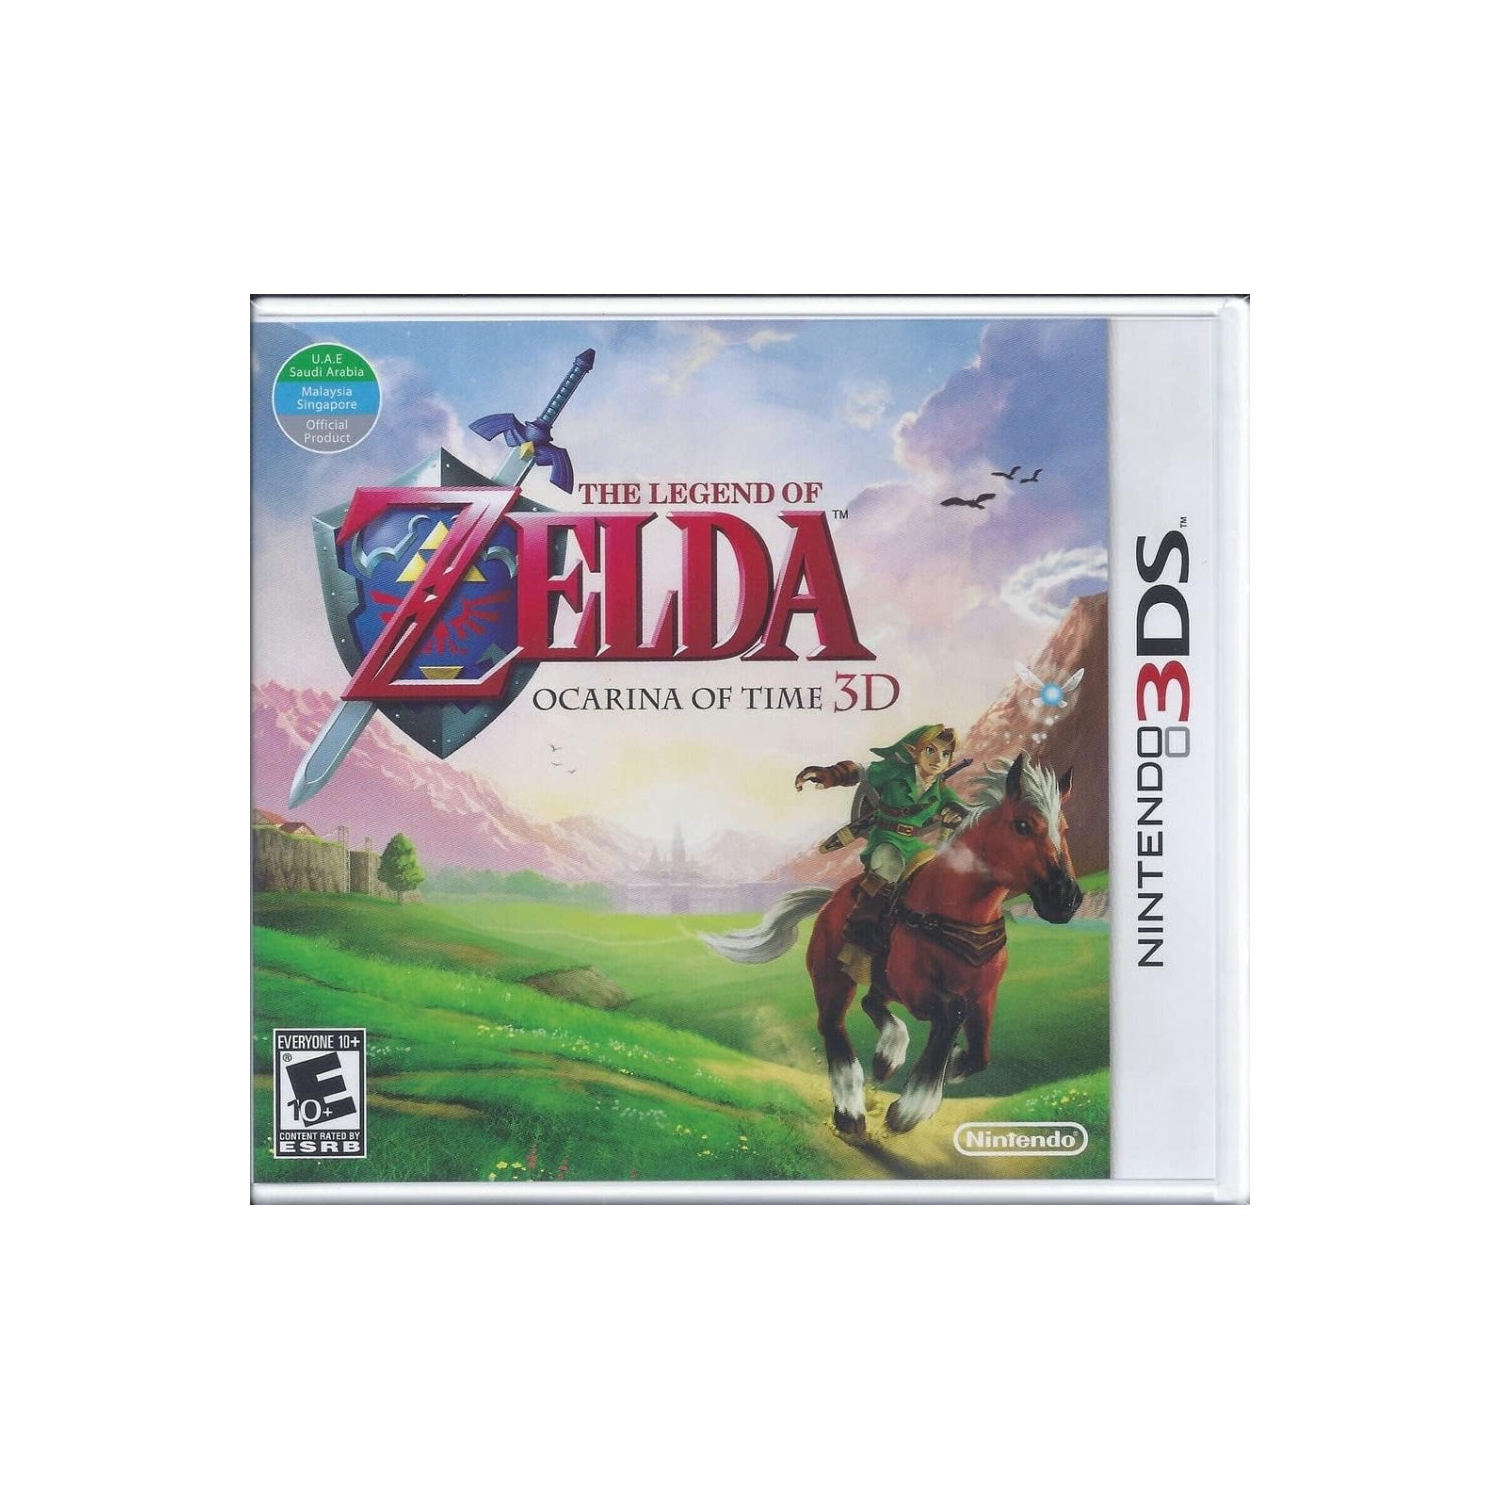 3DS - THE LEGEND OF THE ZELDA OCARINA OF TIME 3D (UAE) Variant Cover